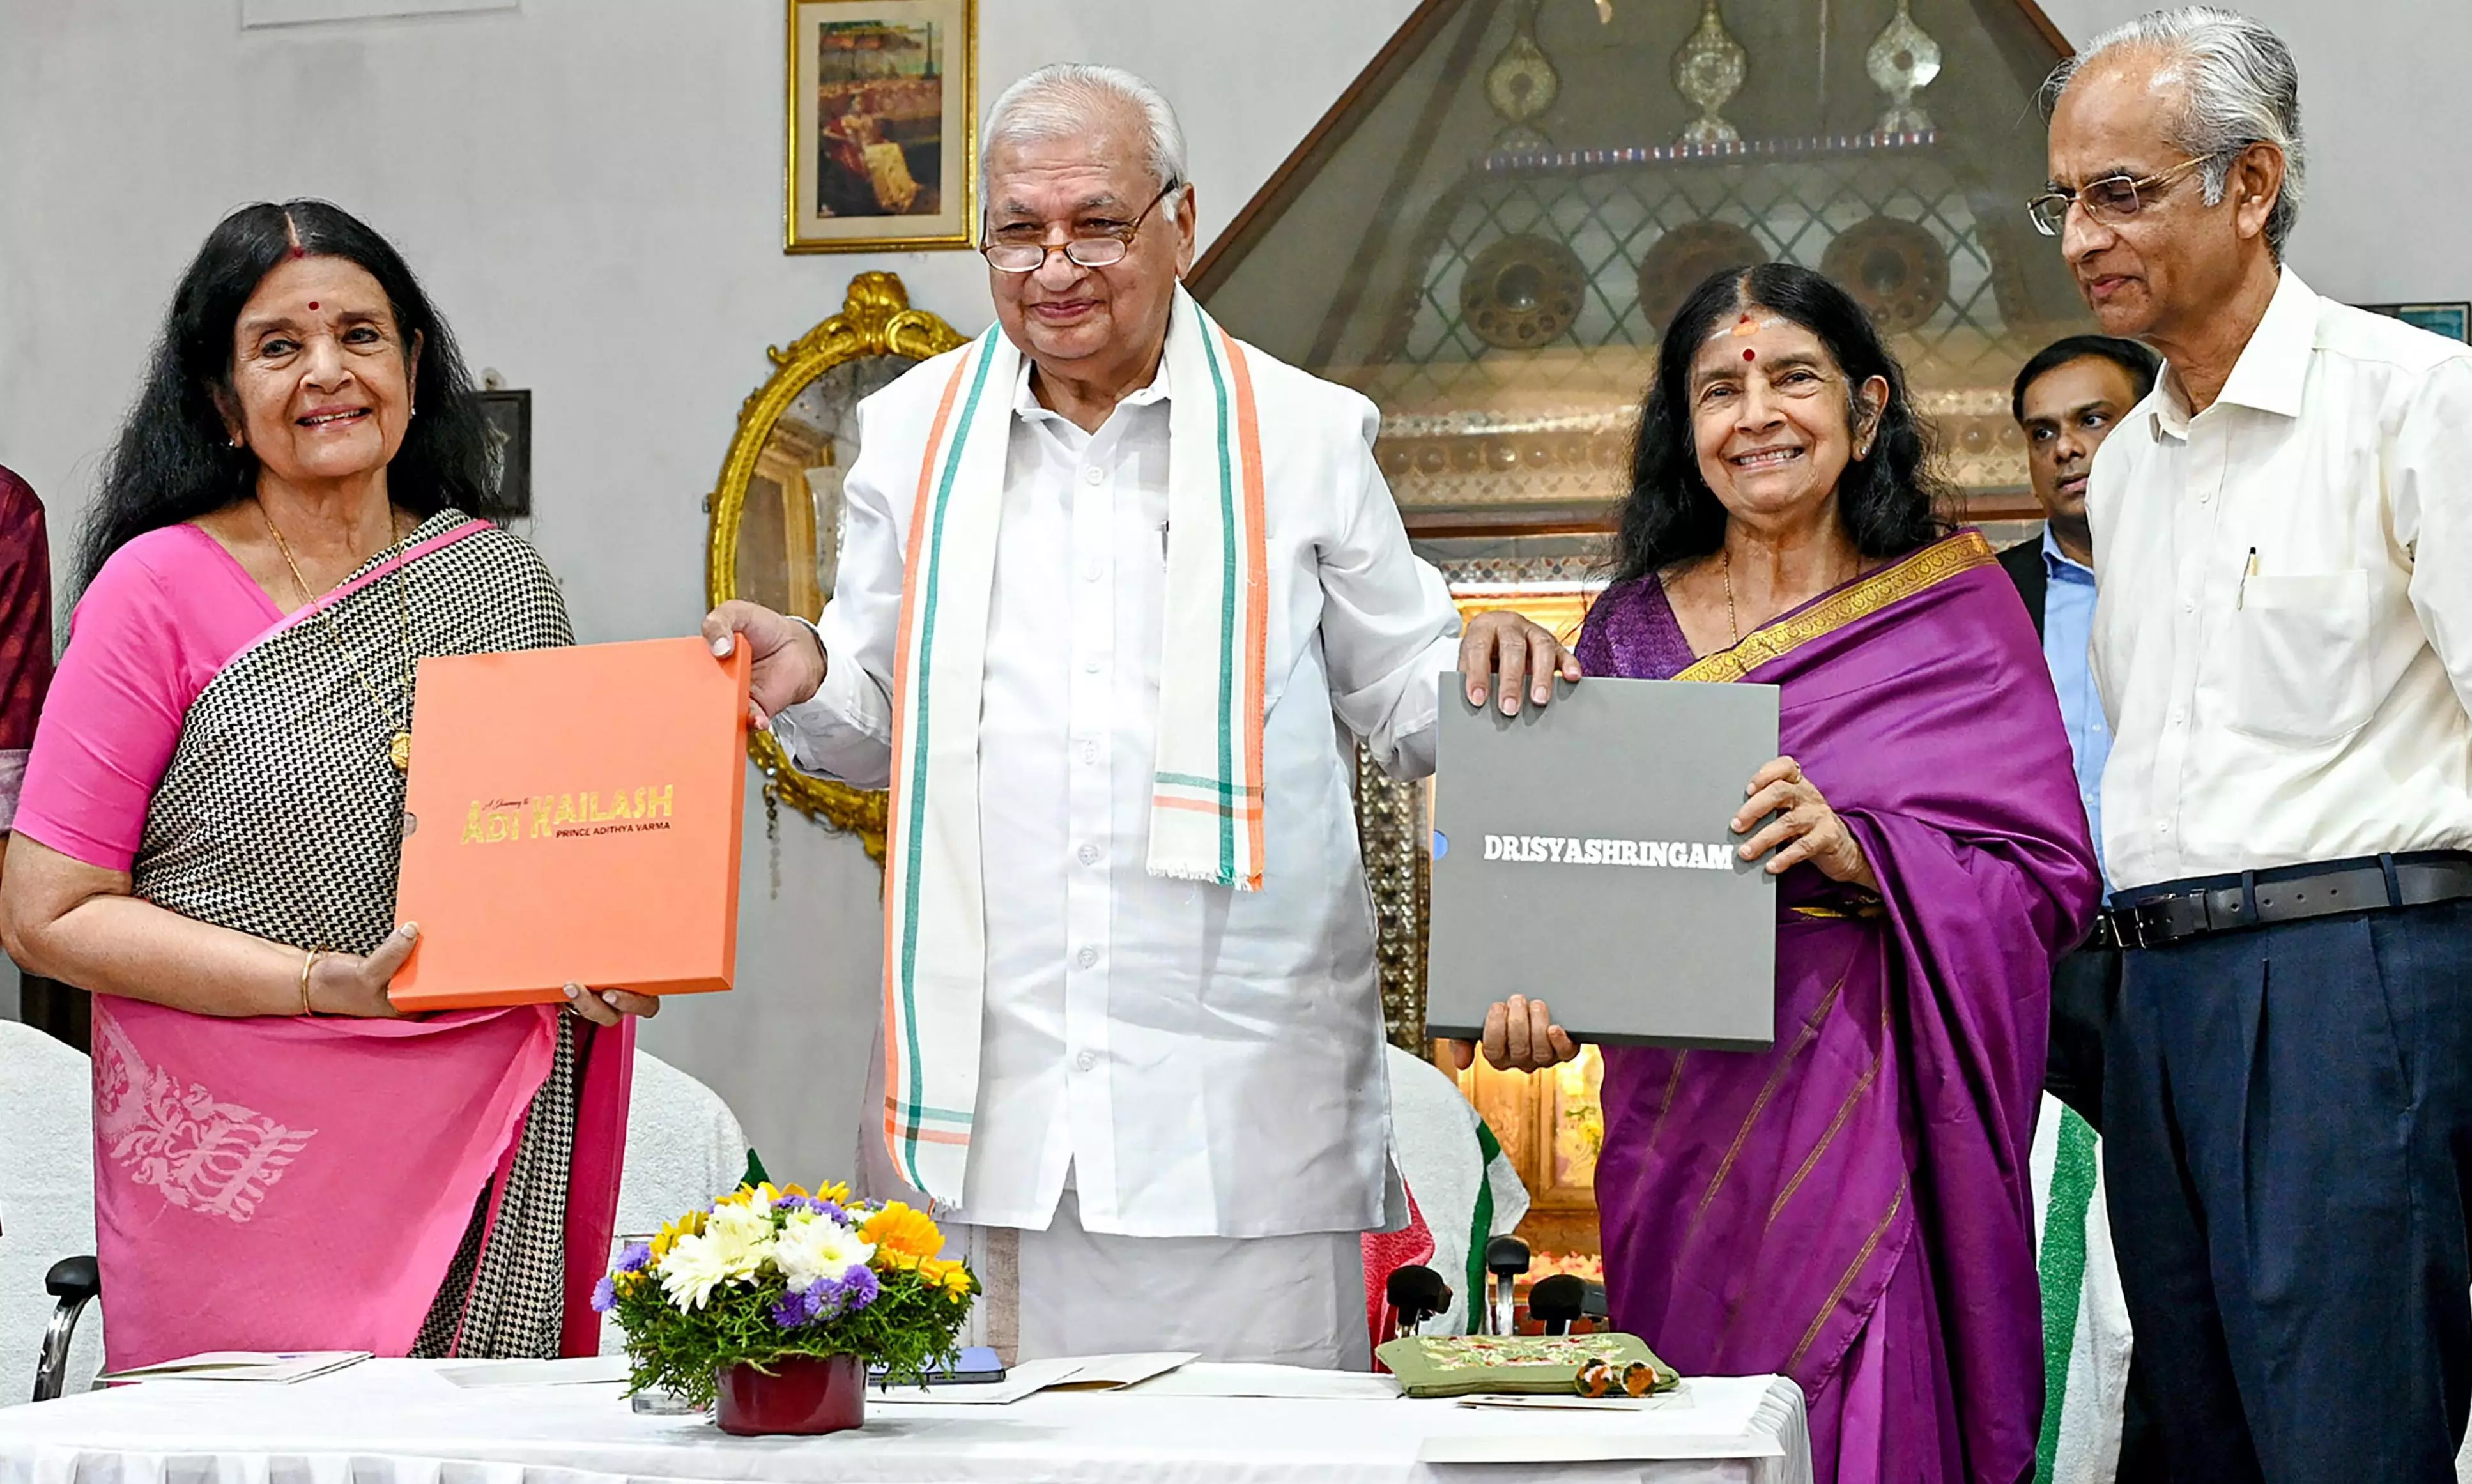 Kerala governor backs Bharat; says India name given by others